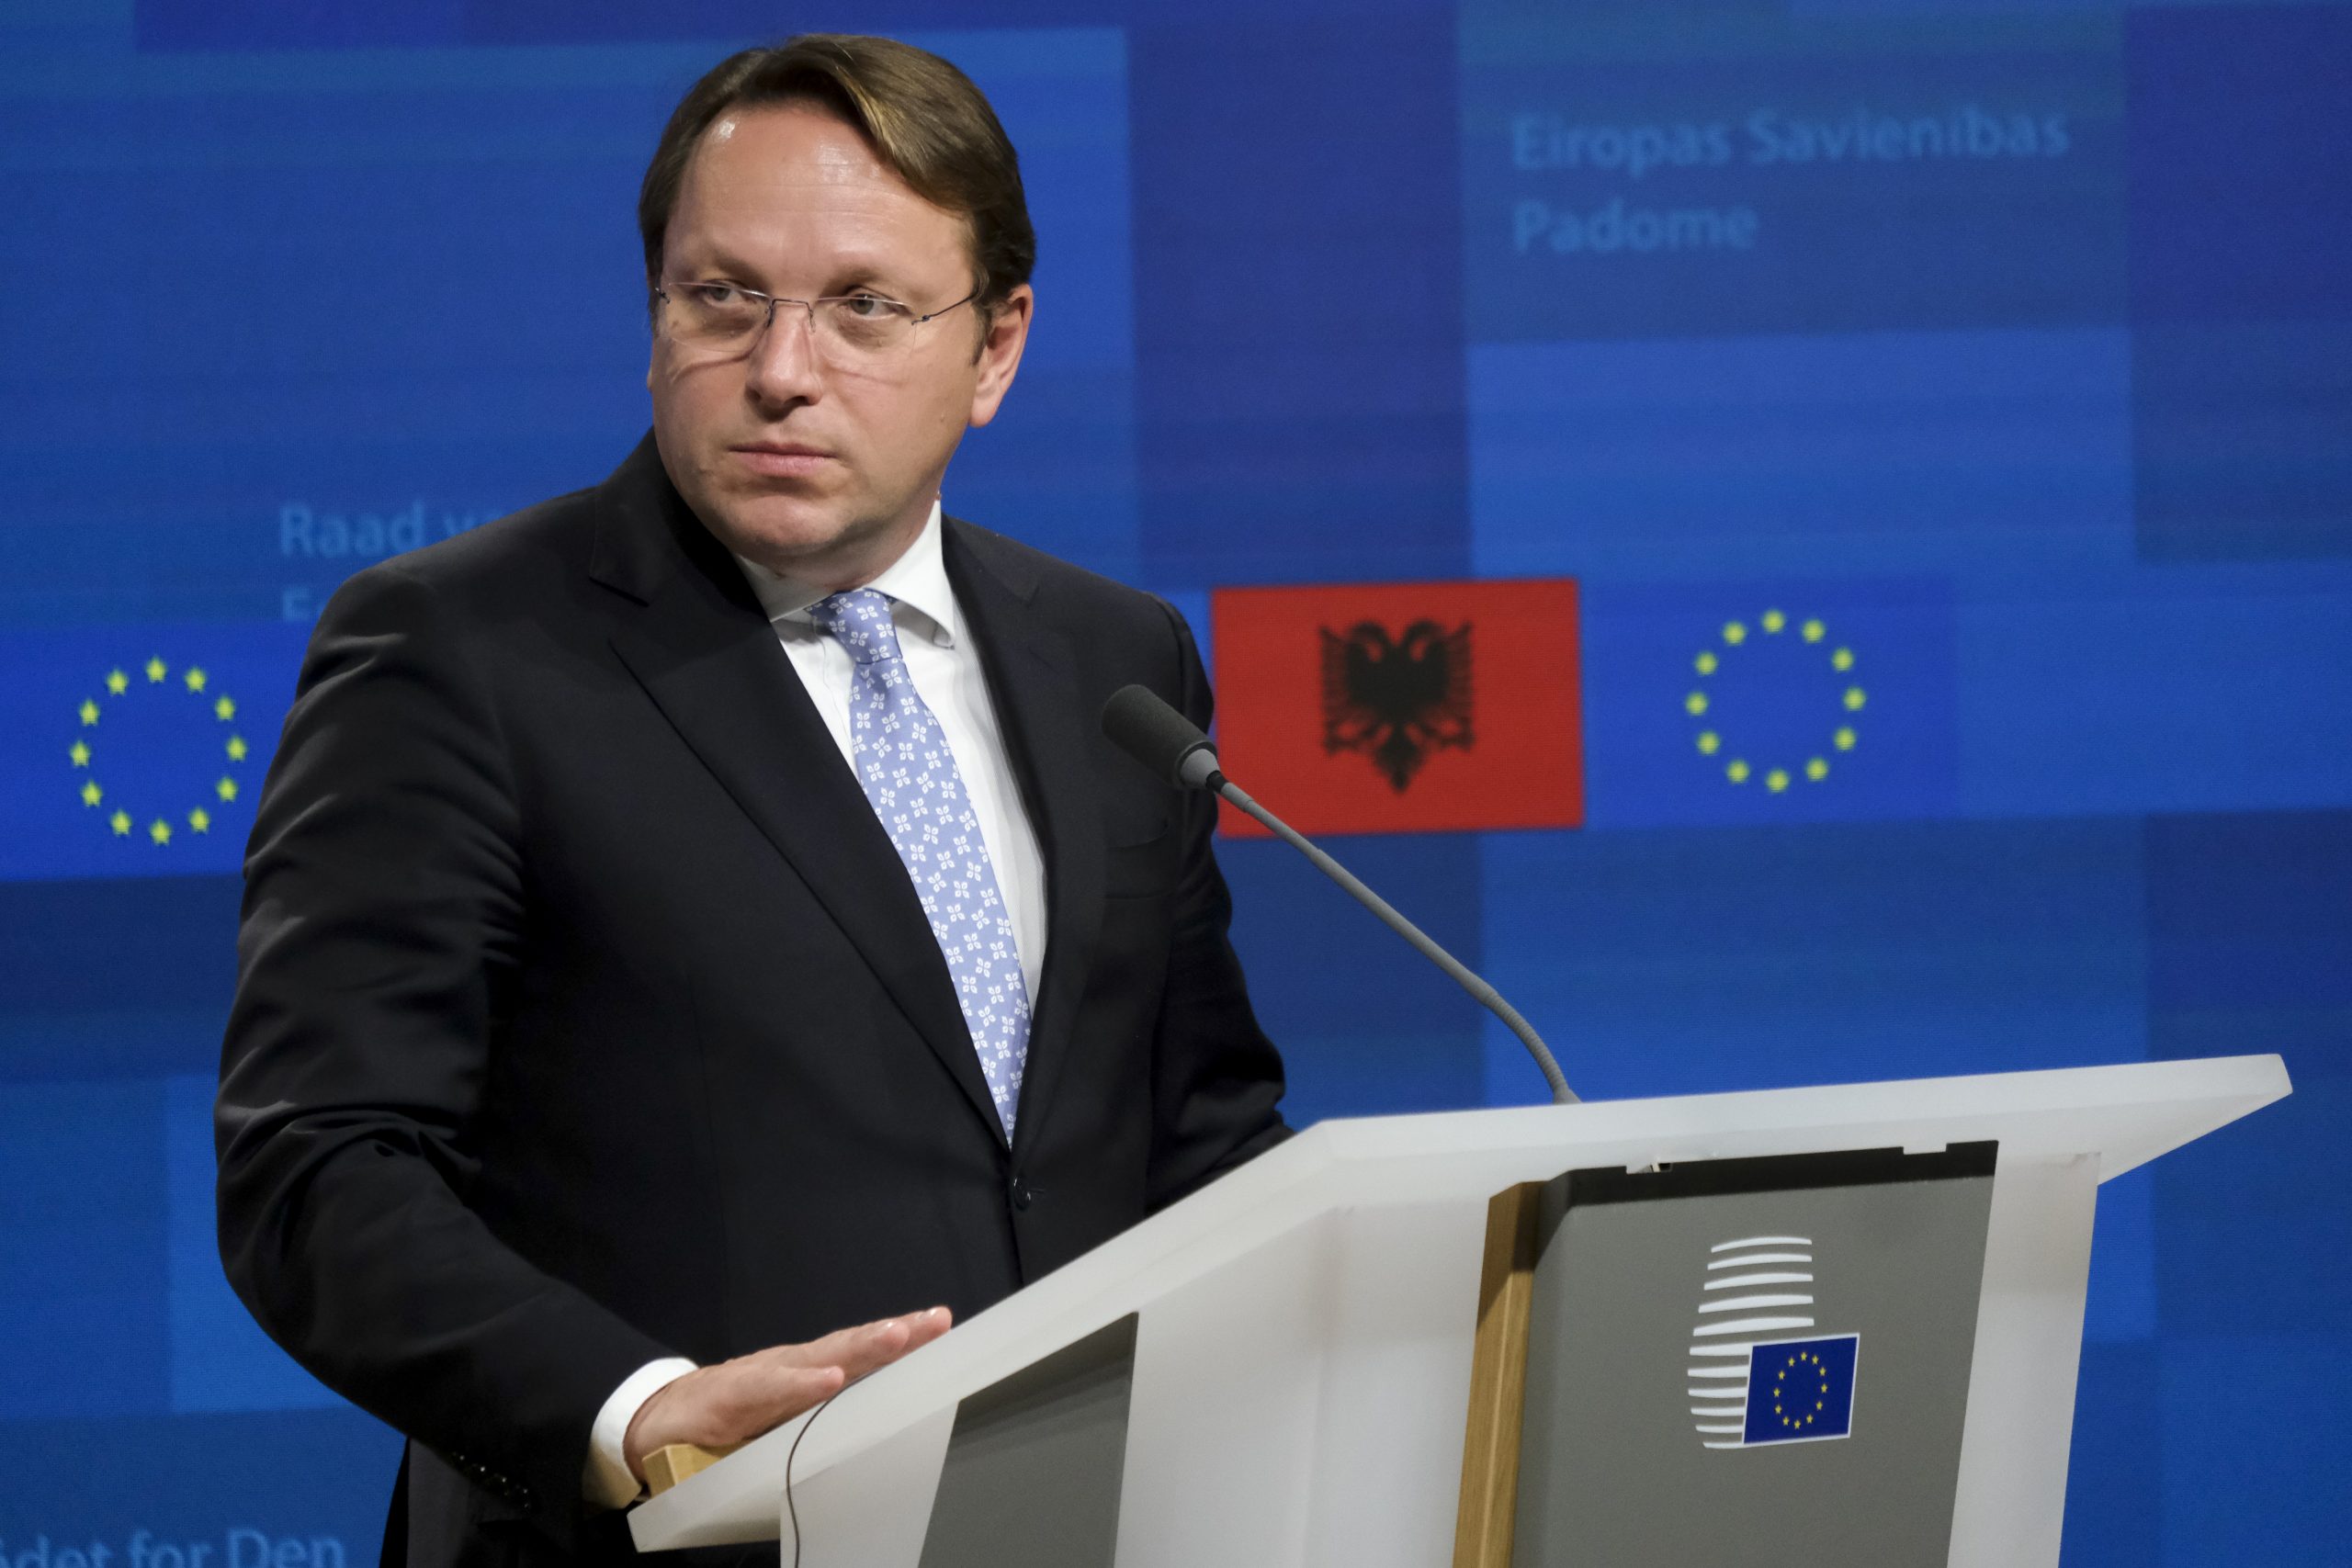 There is Political Will for EU Enlargement